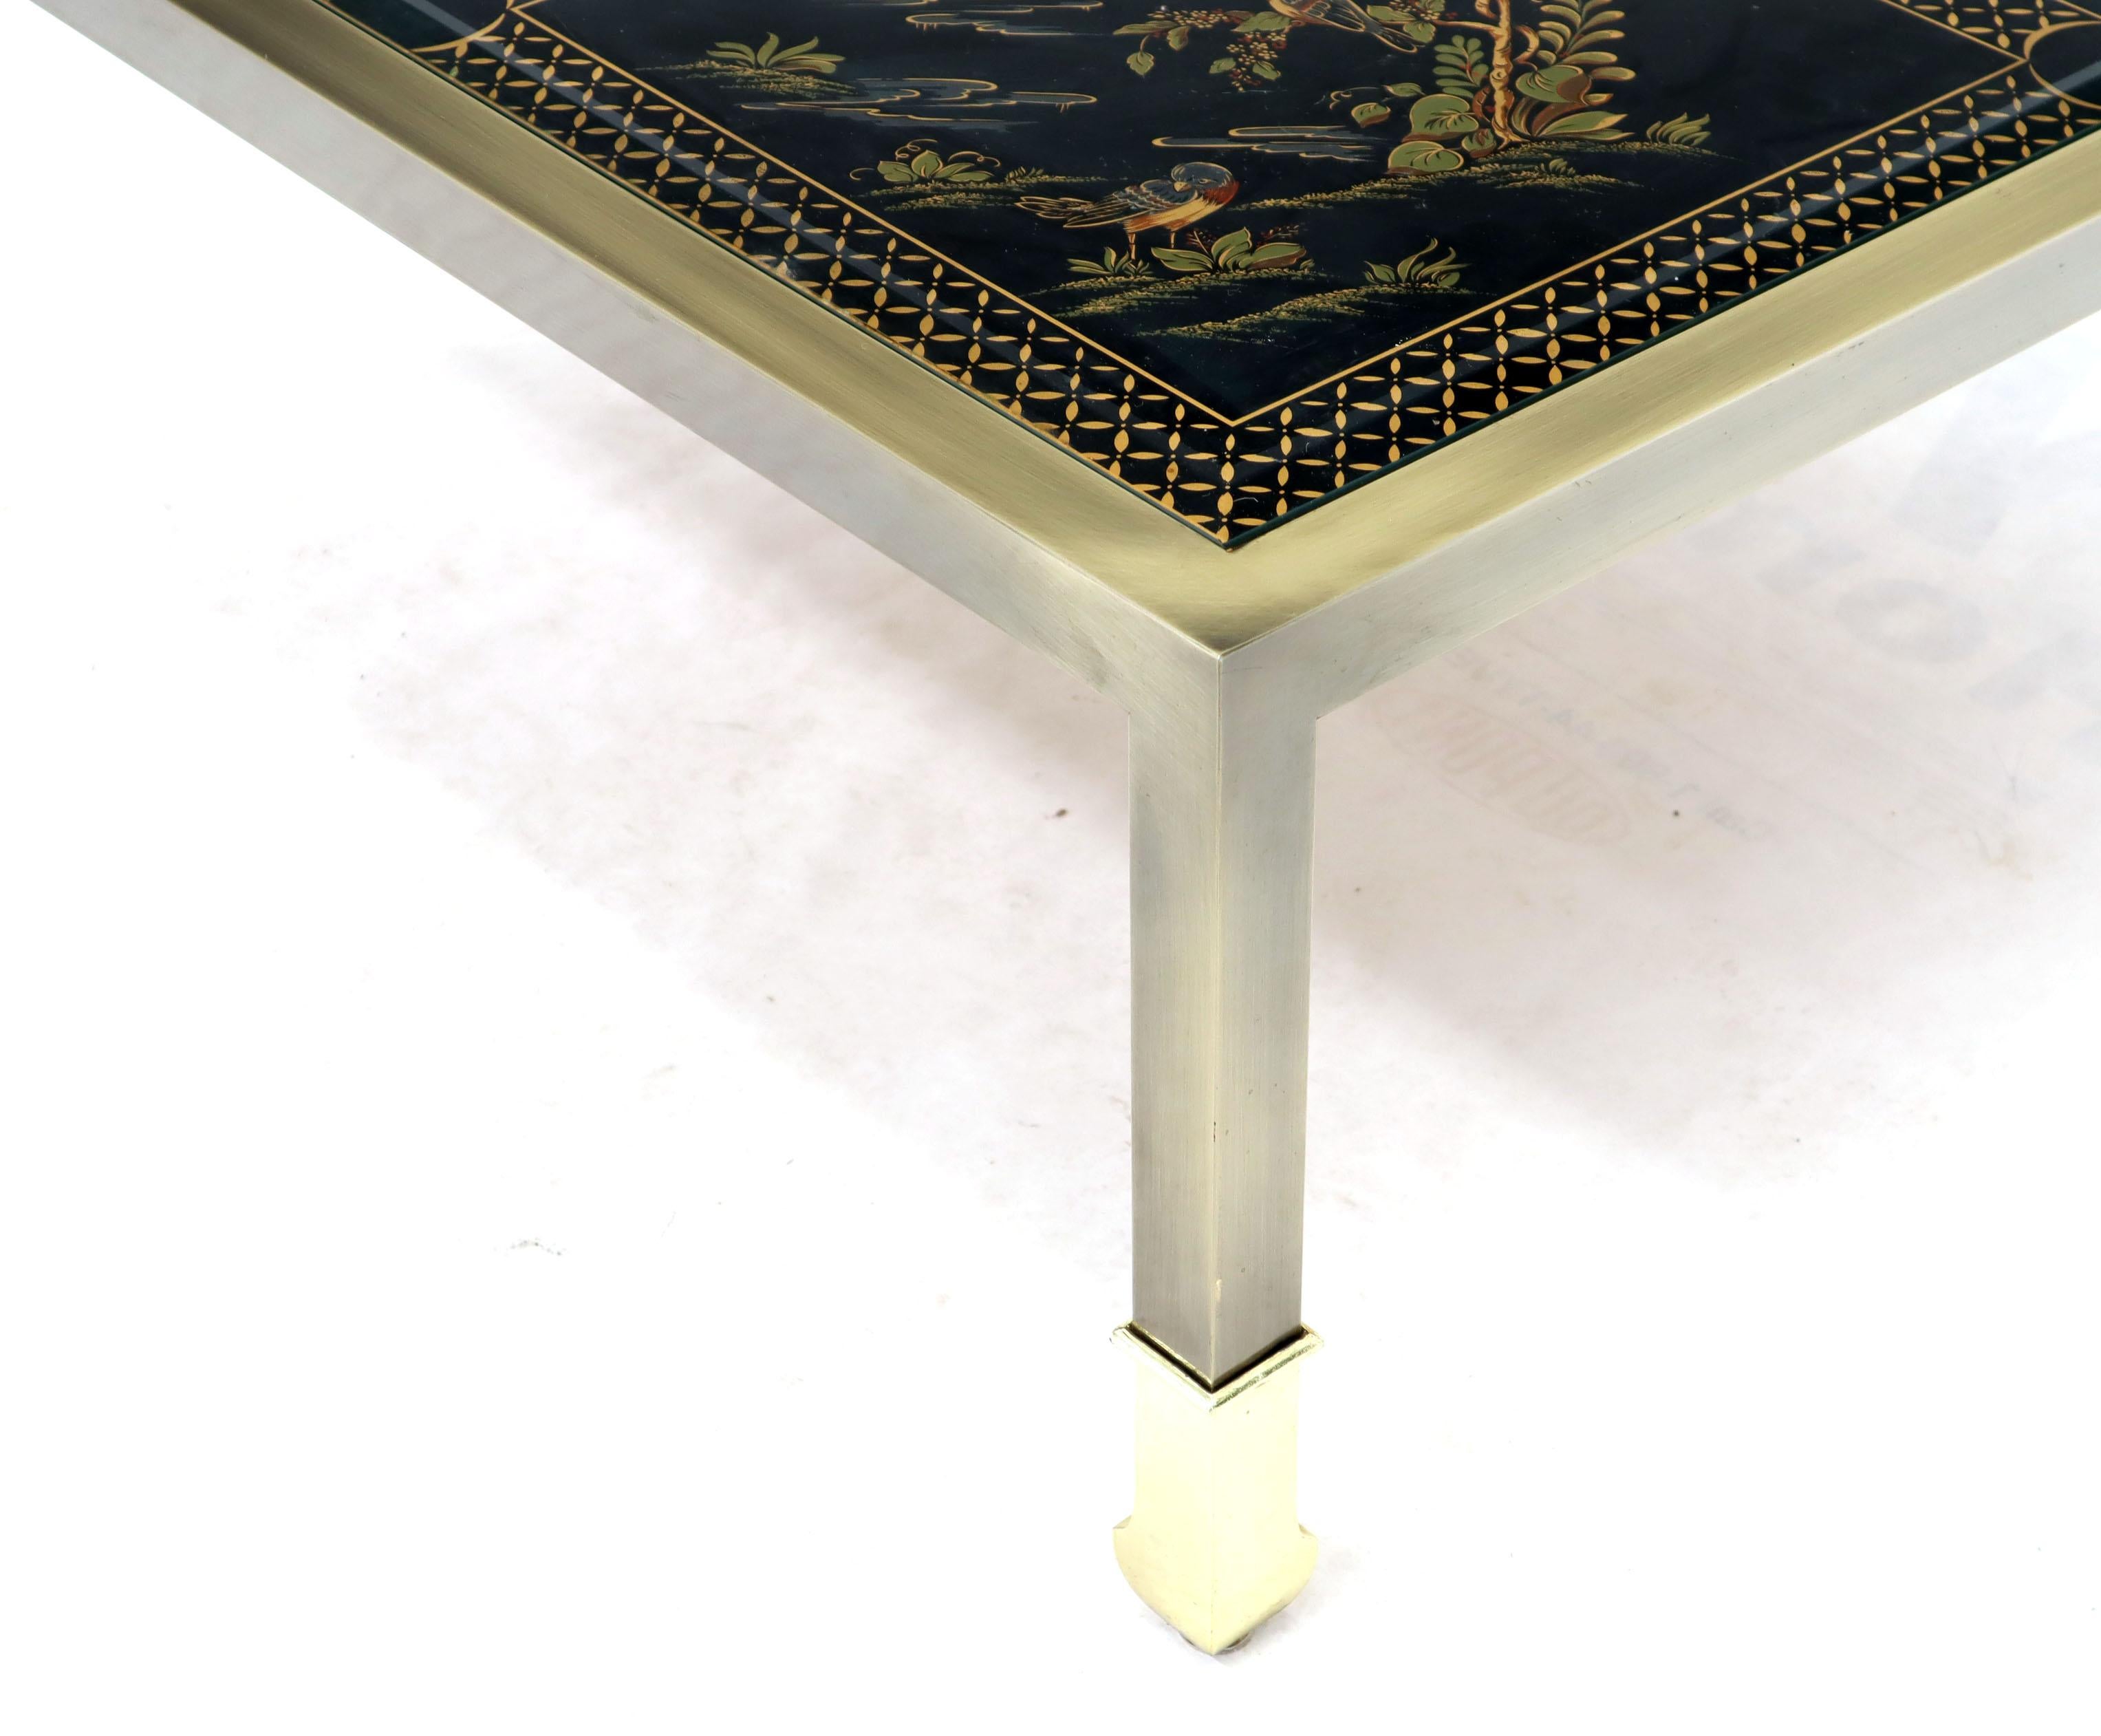 American Brass and Gold Decorated Reverse Painted Glass Top Square Coffee Table